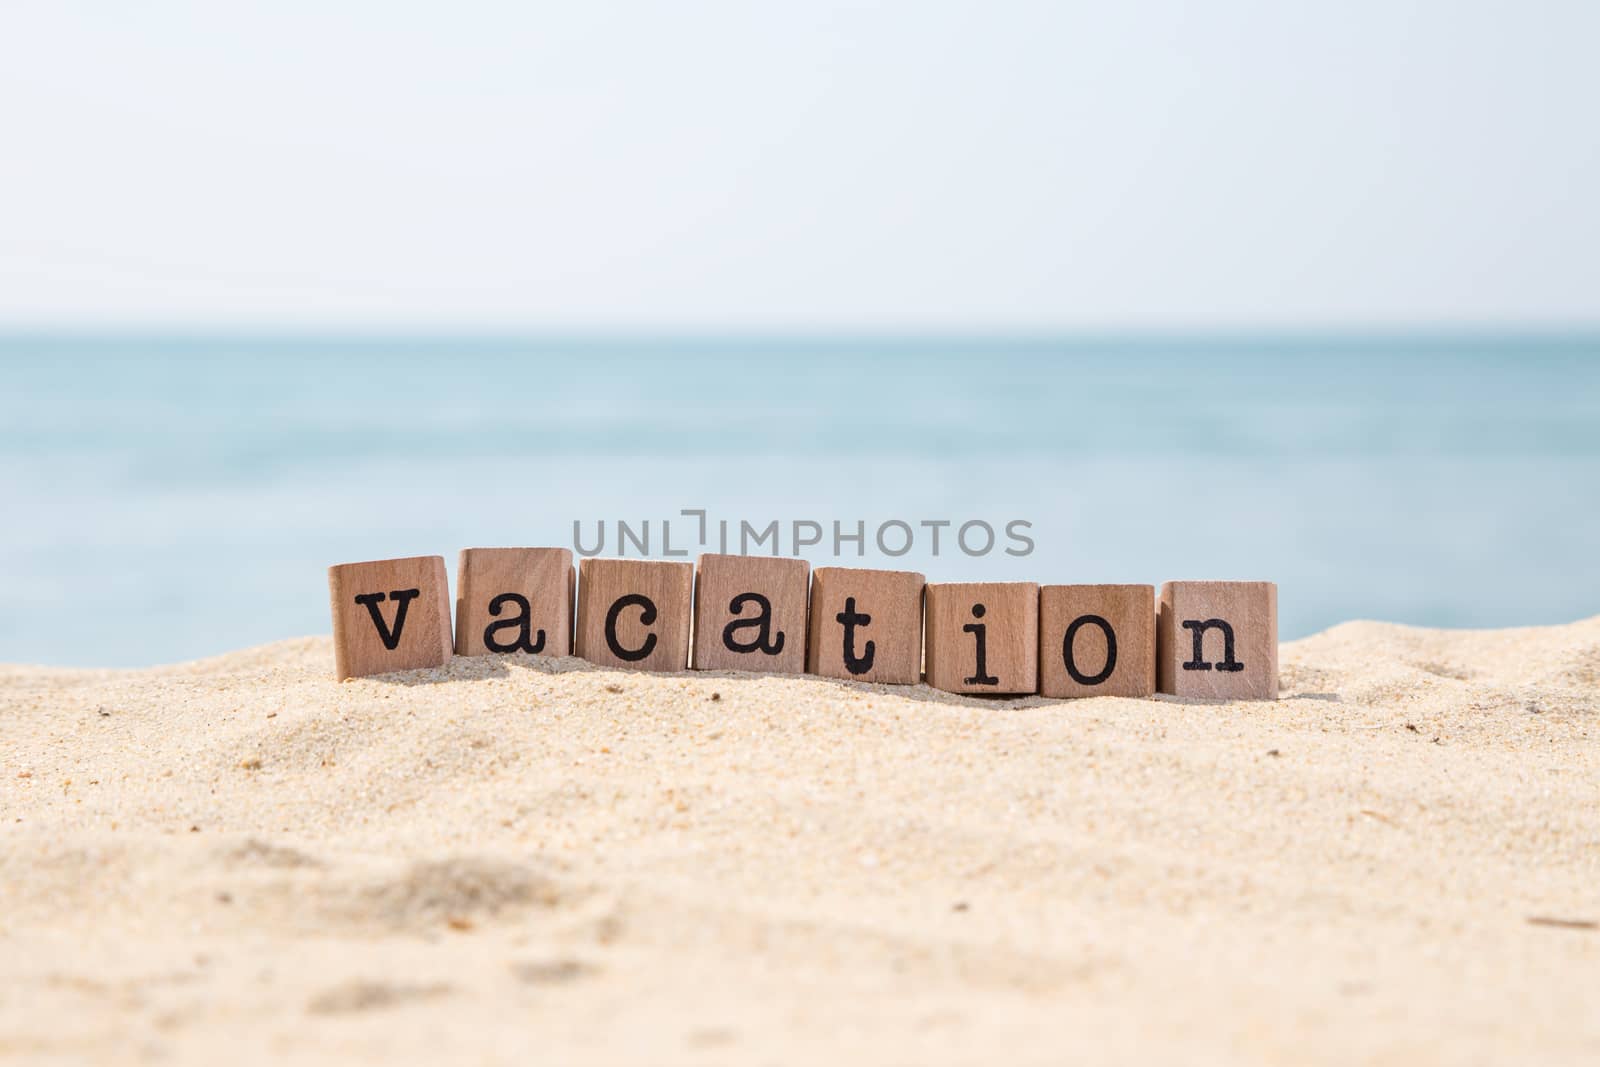 Vacation word on wood rubber stamps stack on the sand beach for holiday and summer season concepts, beautiful blue ocean view during daytime on a sunny day on background